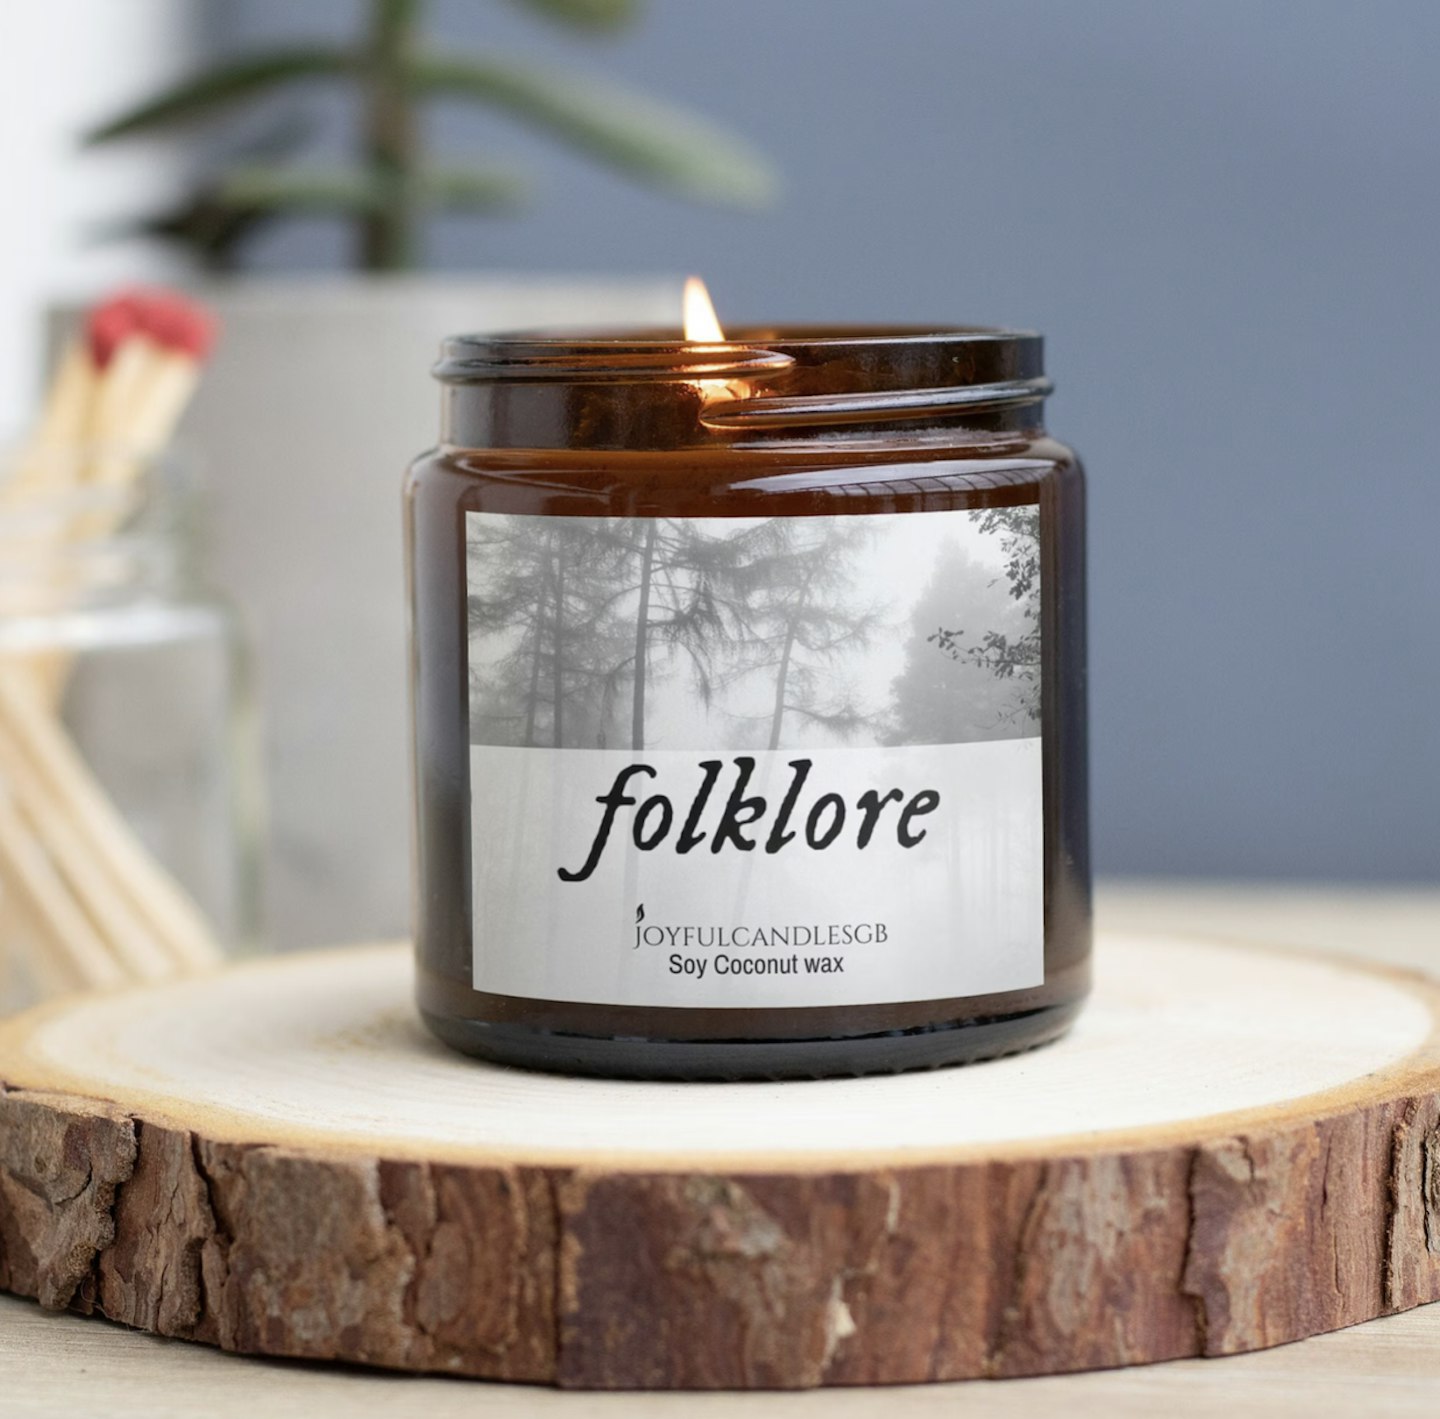 taylor swift folklore candle